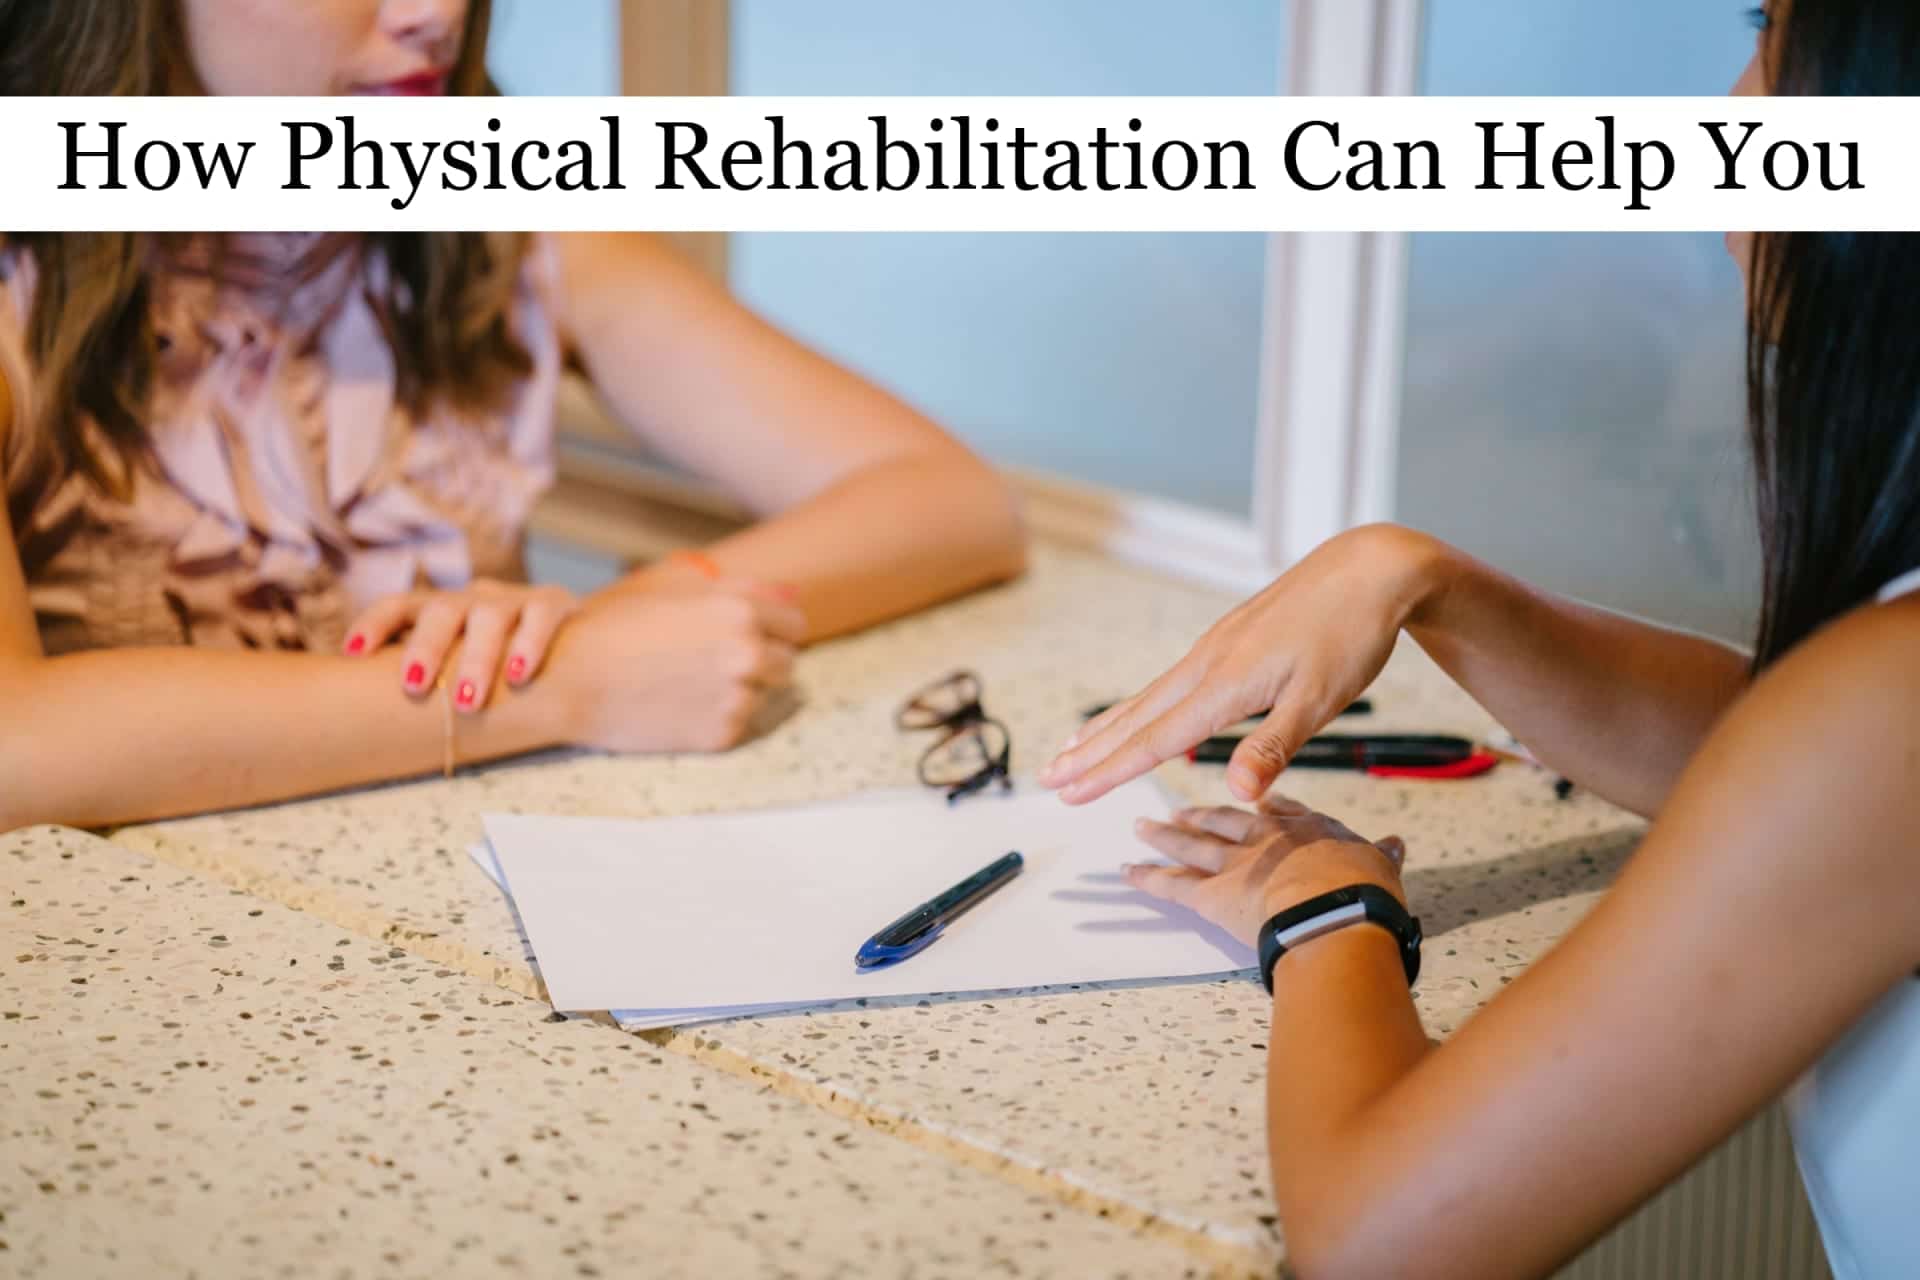 What Does Physical Rehabilitation Mean?